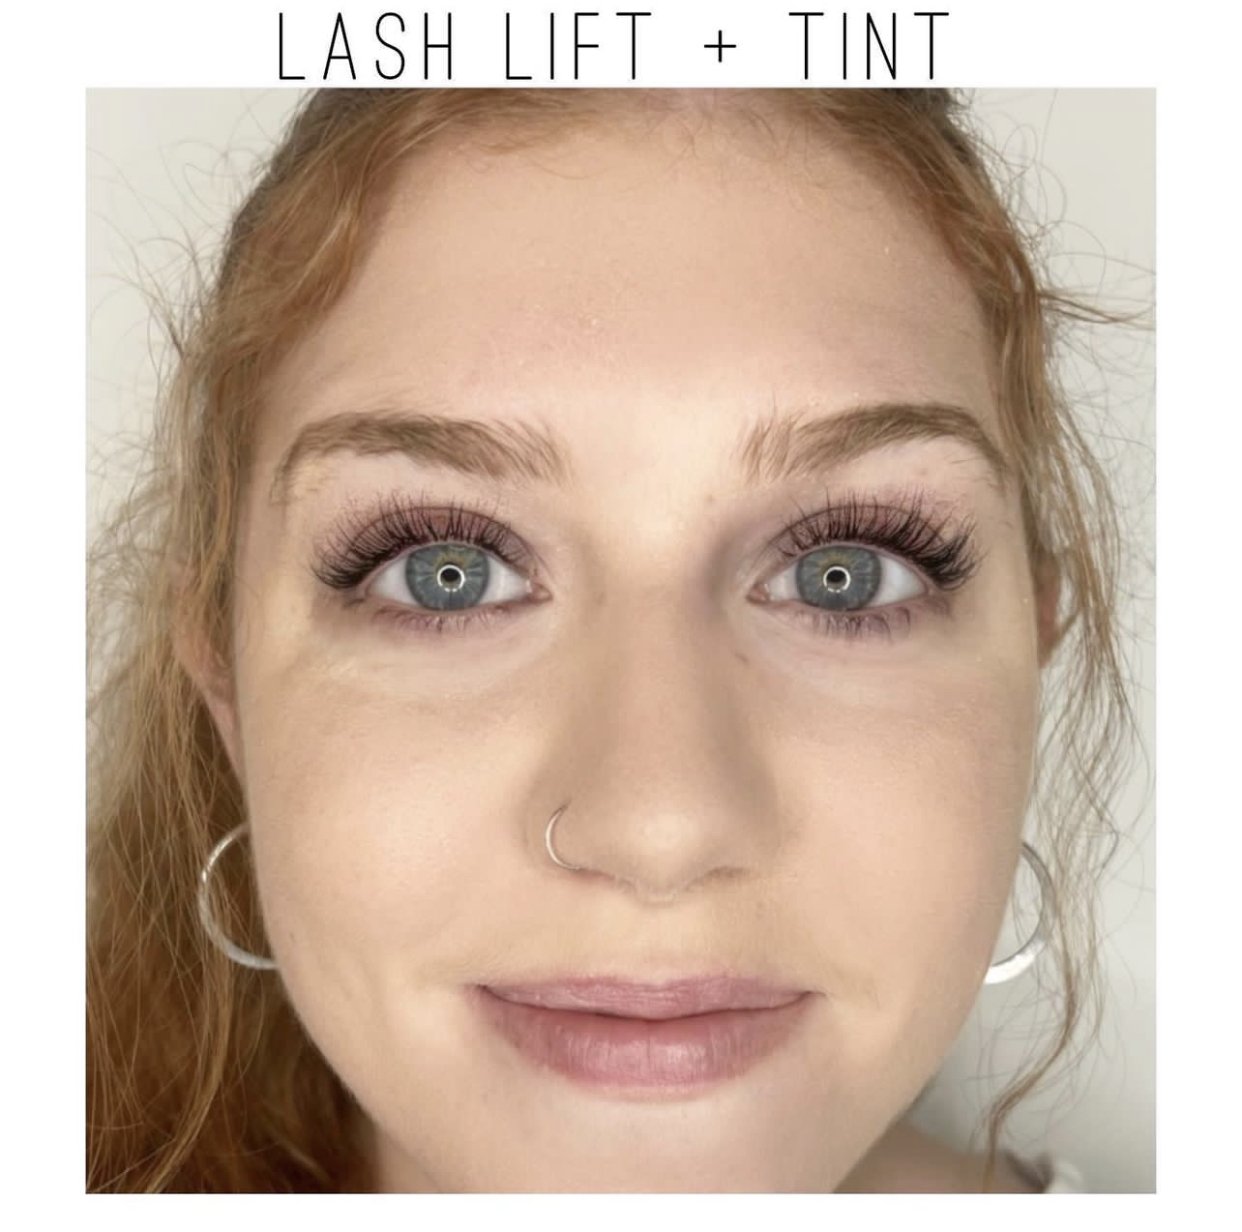 lash lift and tint photo from ig.jpg